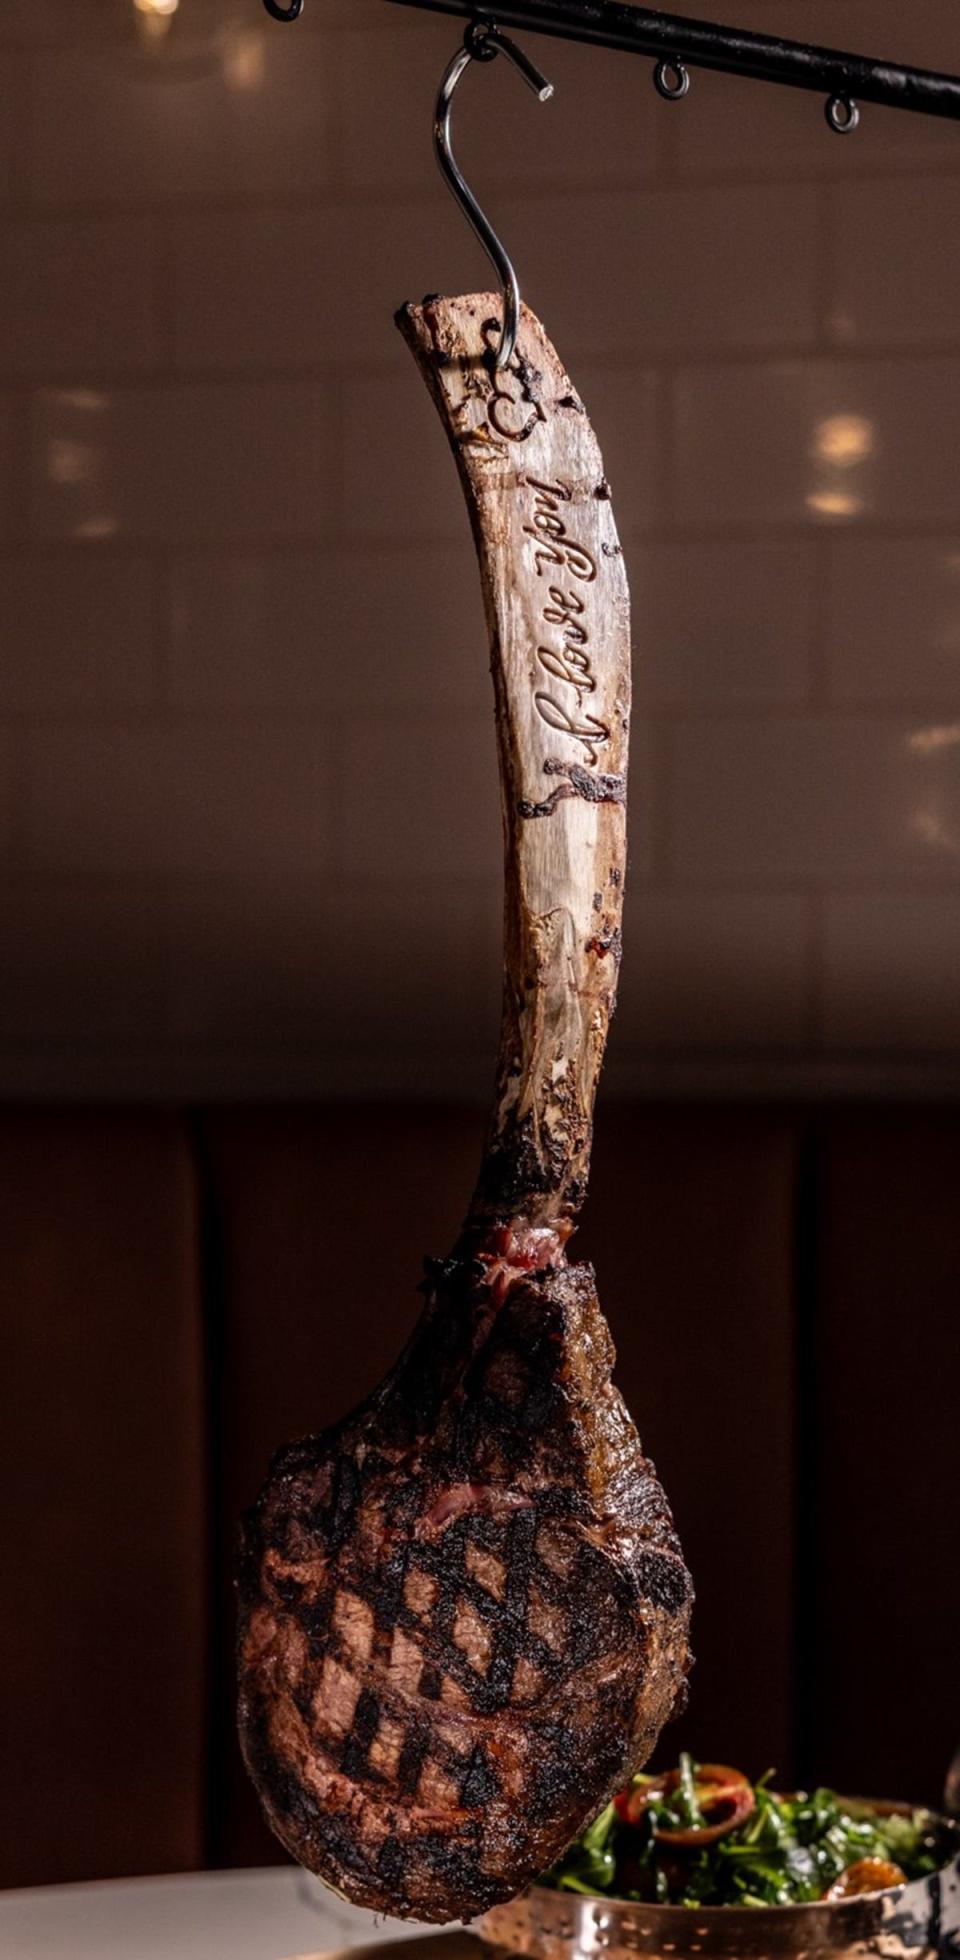 The Red Horse by David Burke features dishes such as a 40-ounce Tomahawk ribeye for two with “I Love You” branded on the bone for an extra $25 per person.